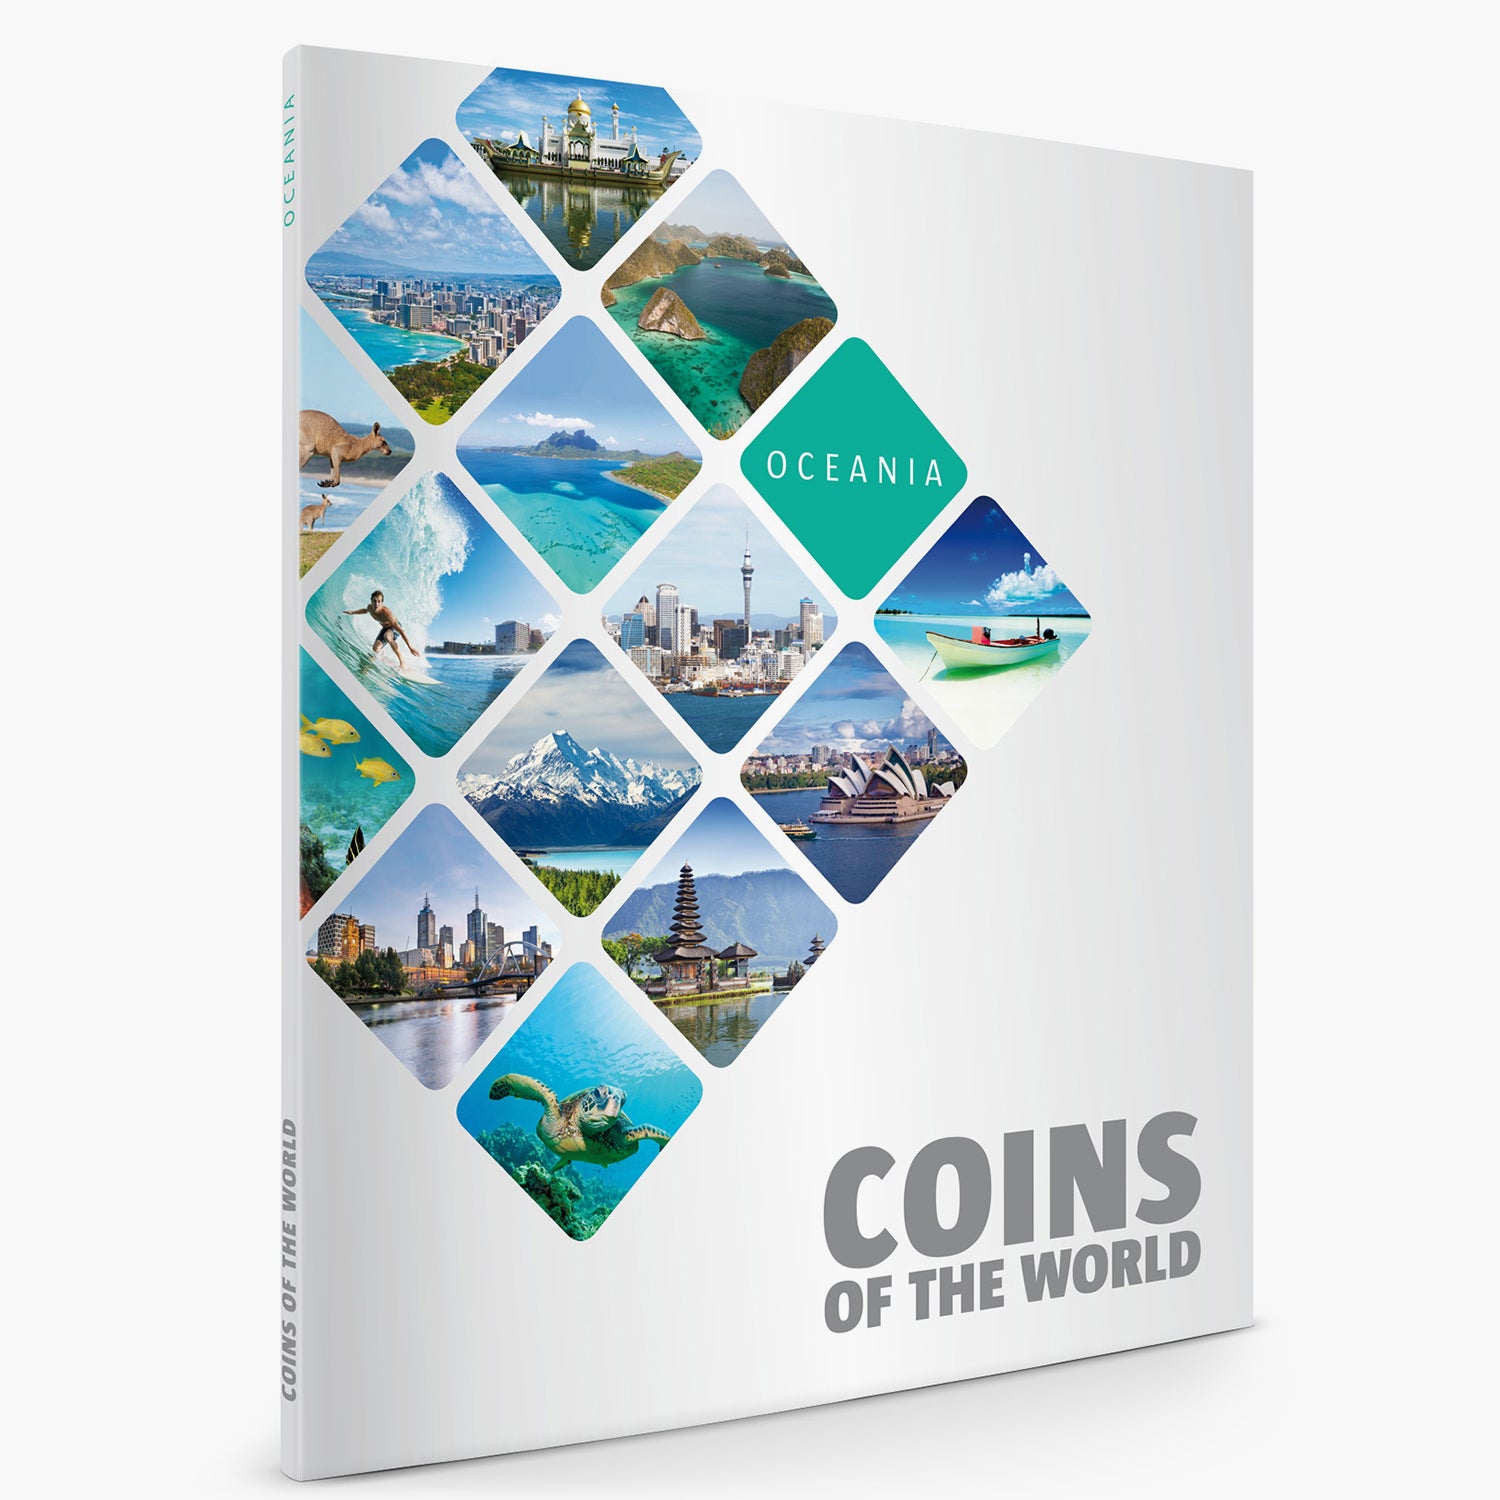 Coins of the World | Oceania